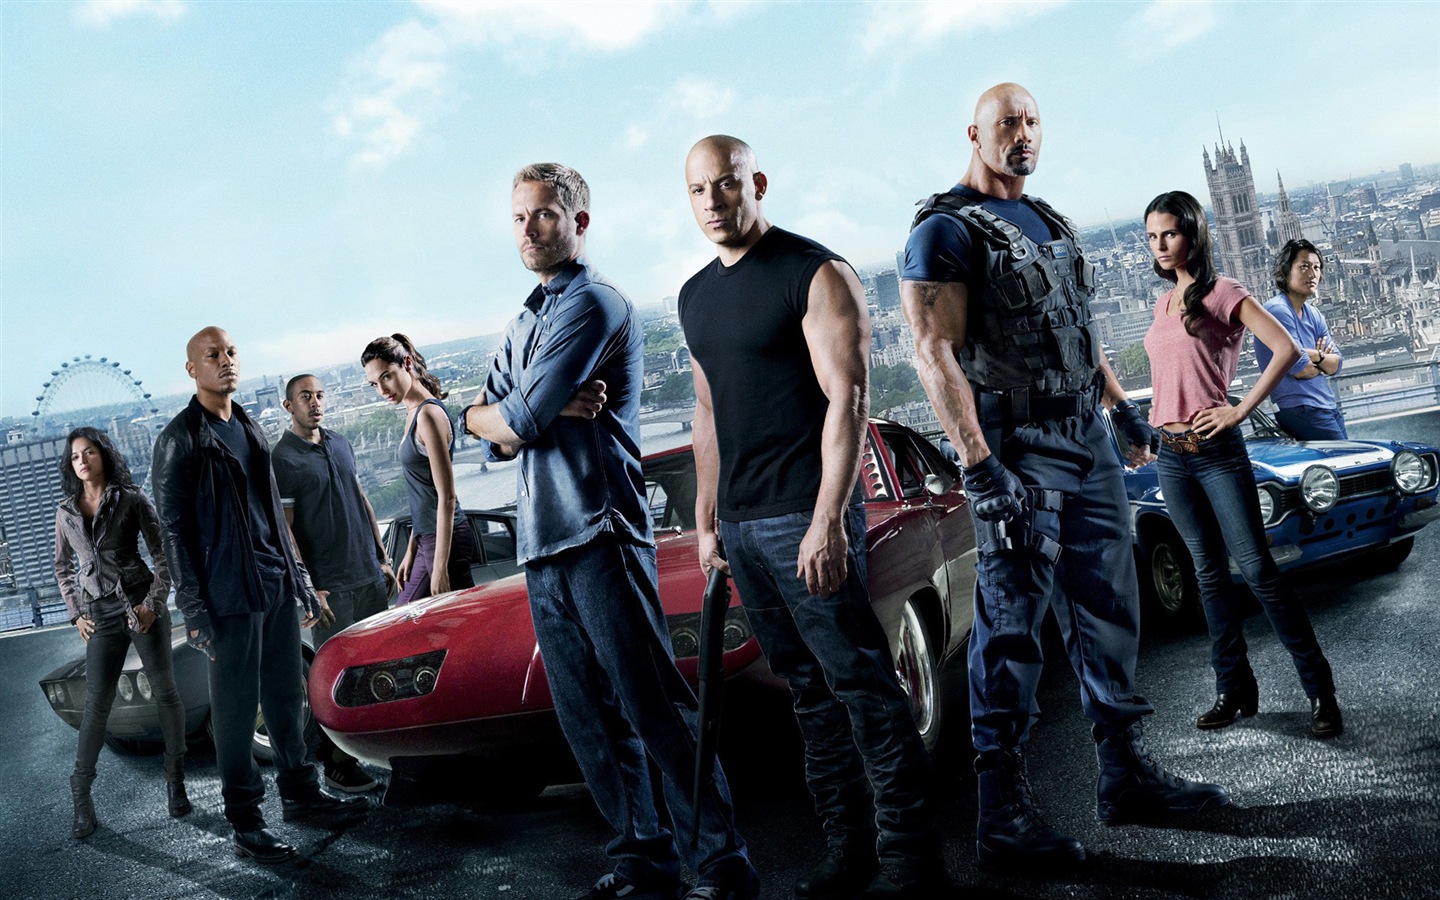 Fast And Furious 6 HD movie wallpapers #1 - 1440x900